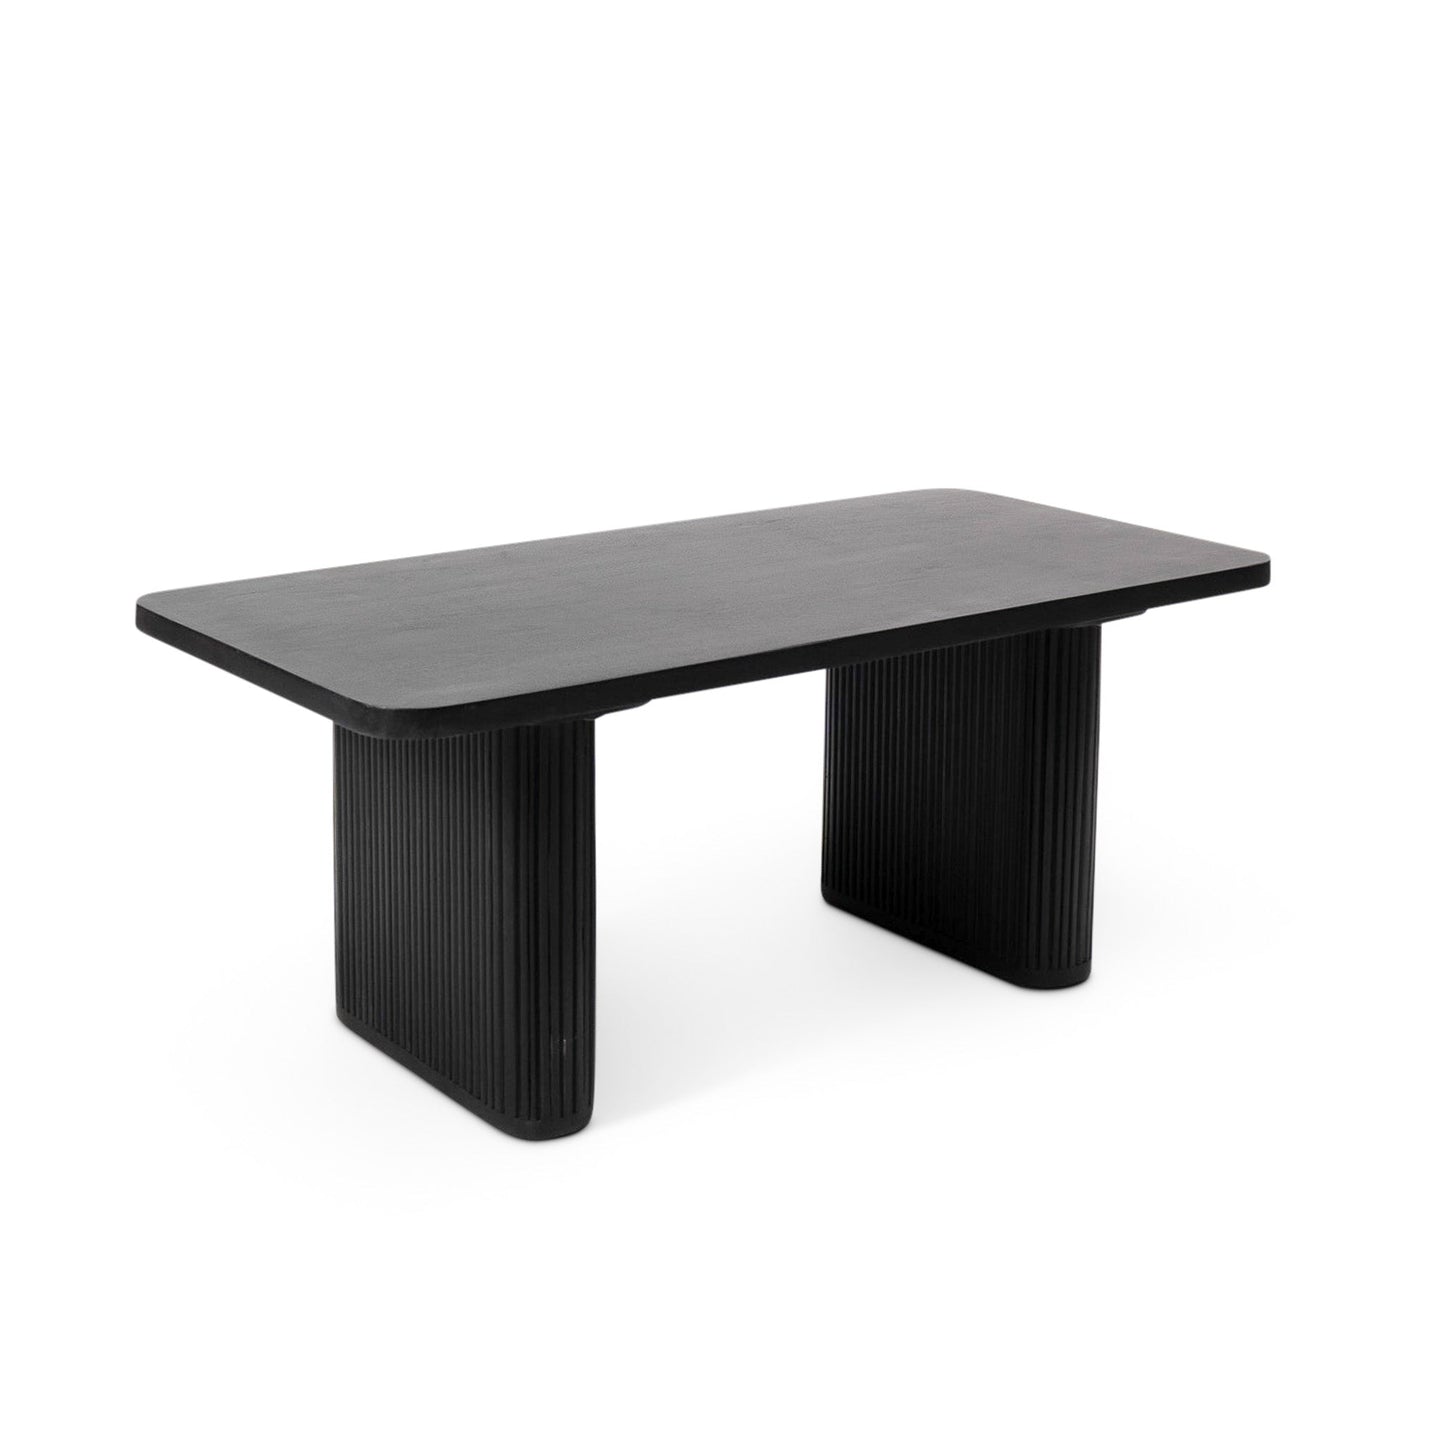 Orla Wooden Coffee Table - Jet Black - Laura James